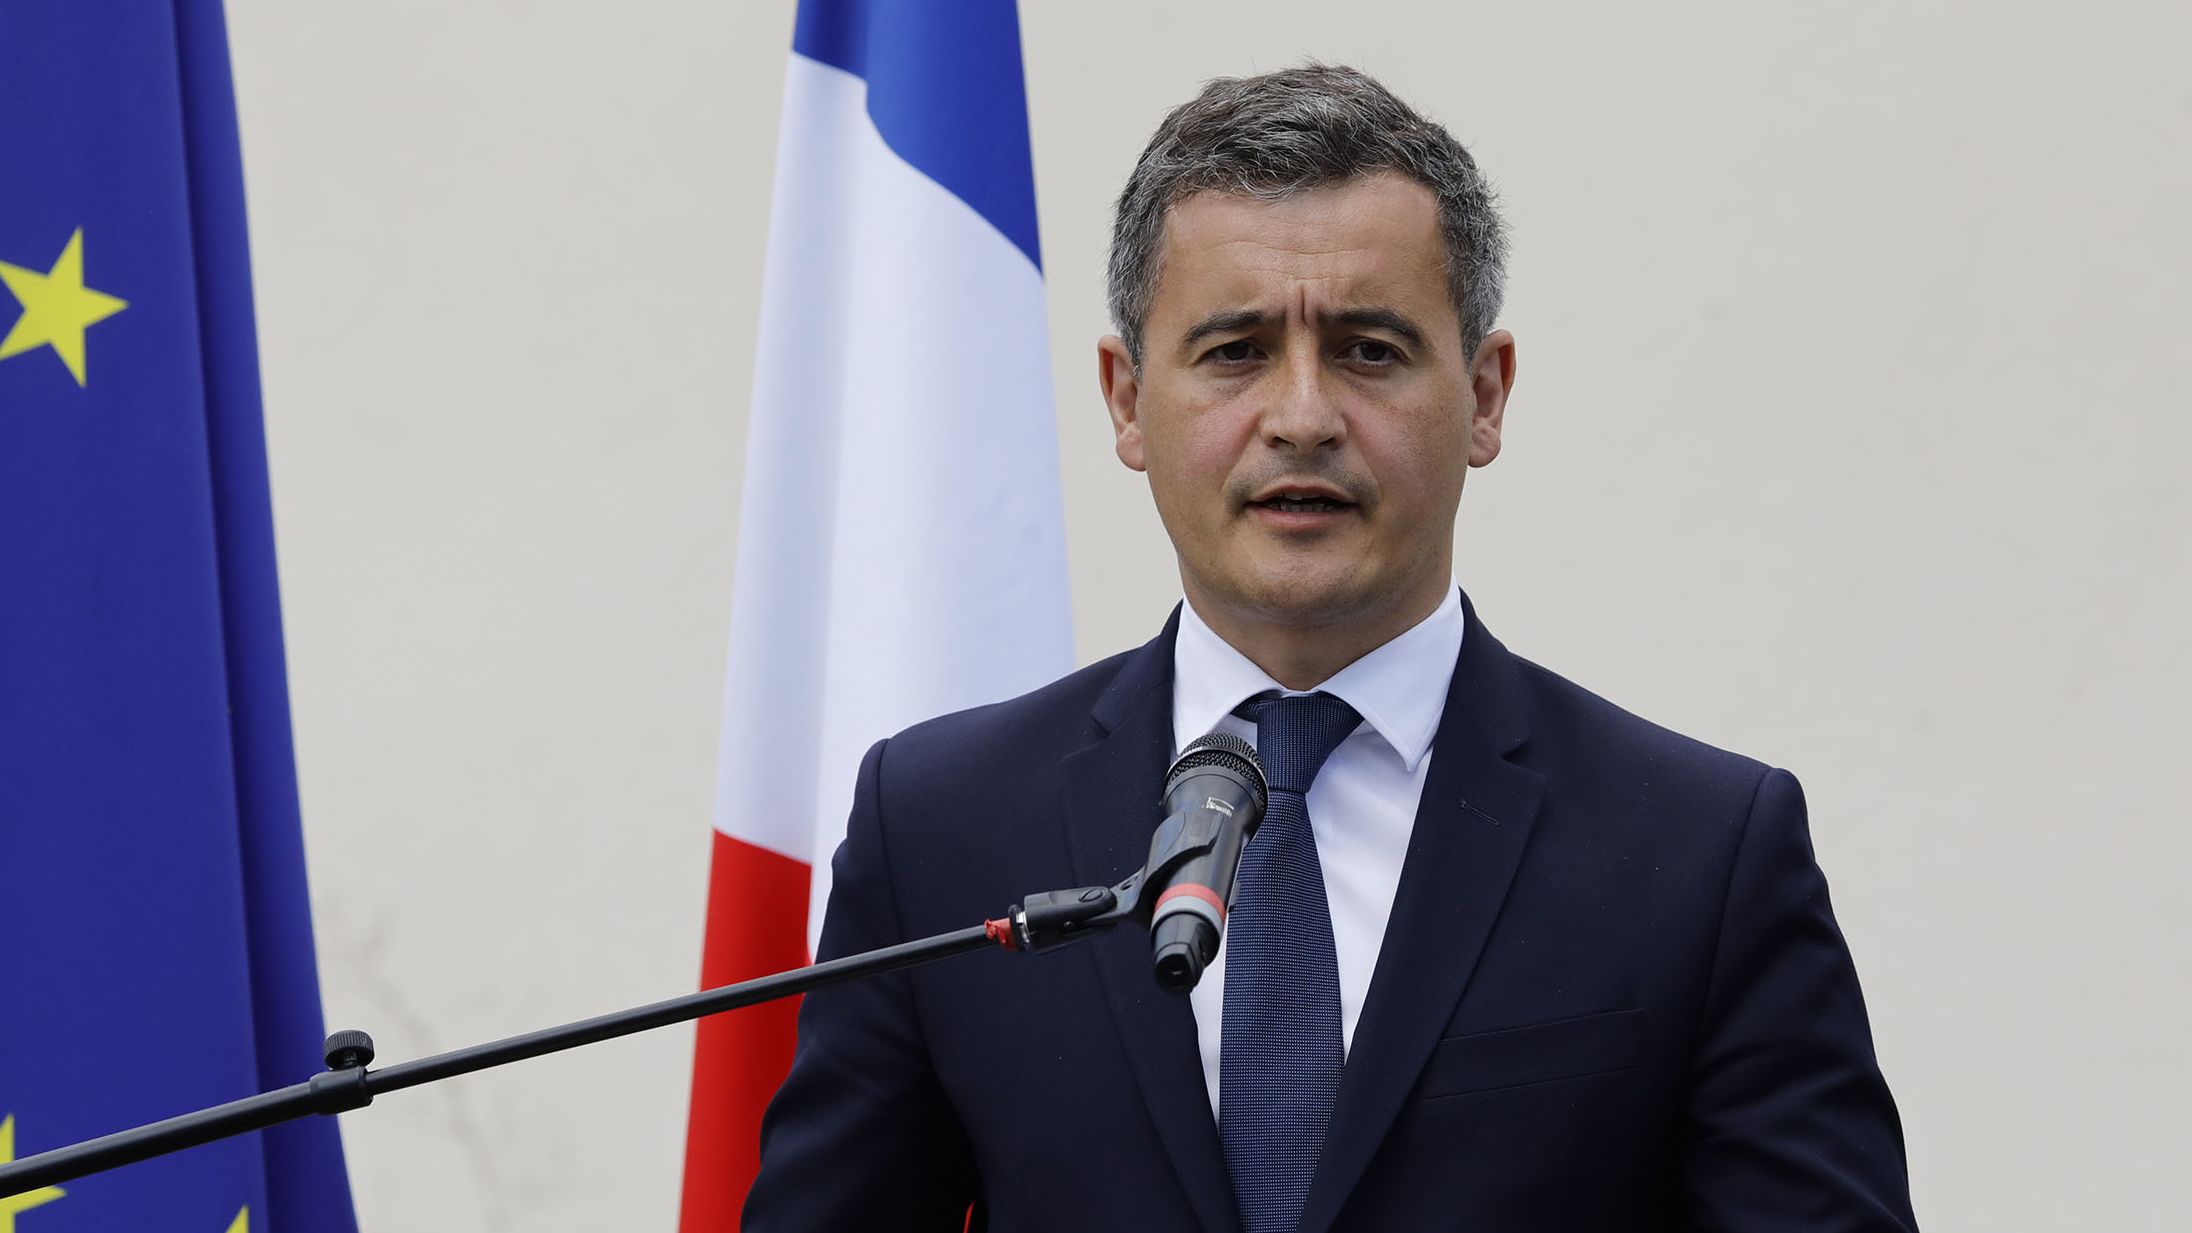 Gerald Darmanin was appointed interior minister on July 6.